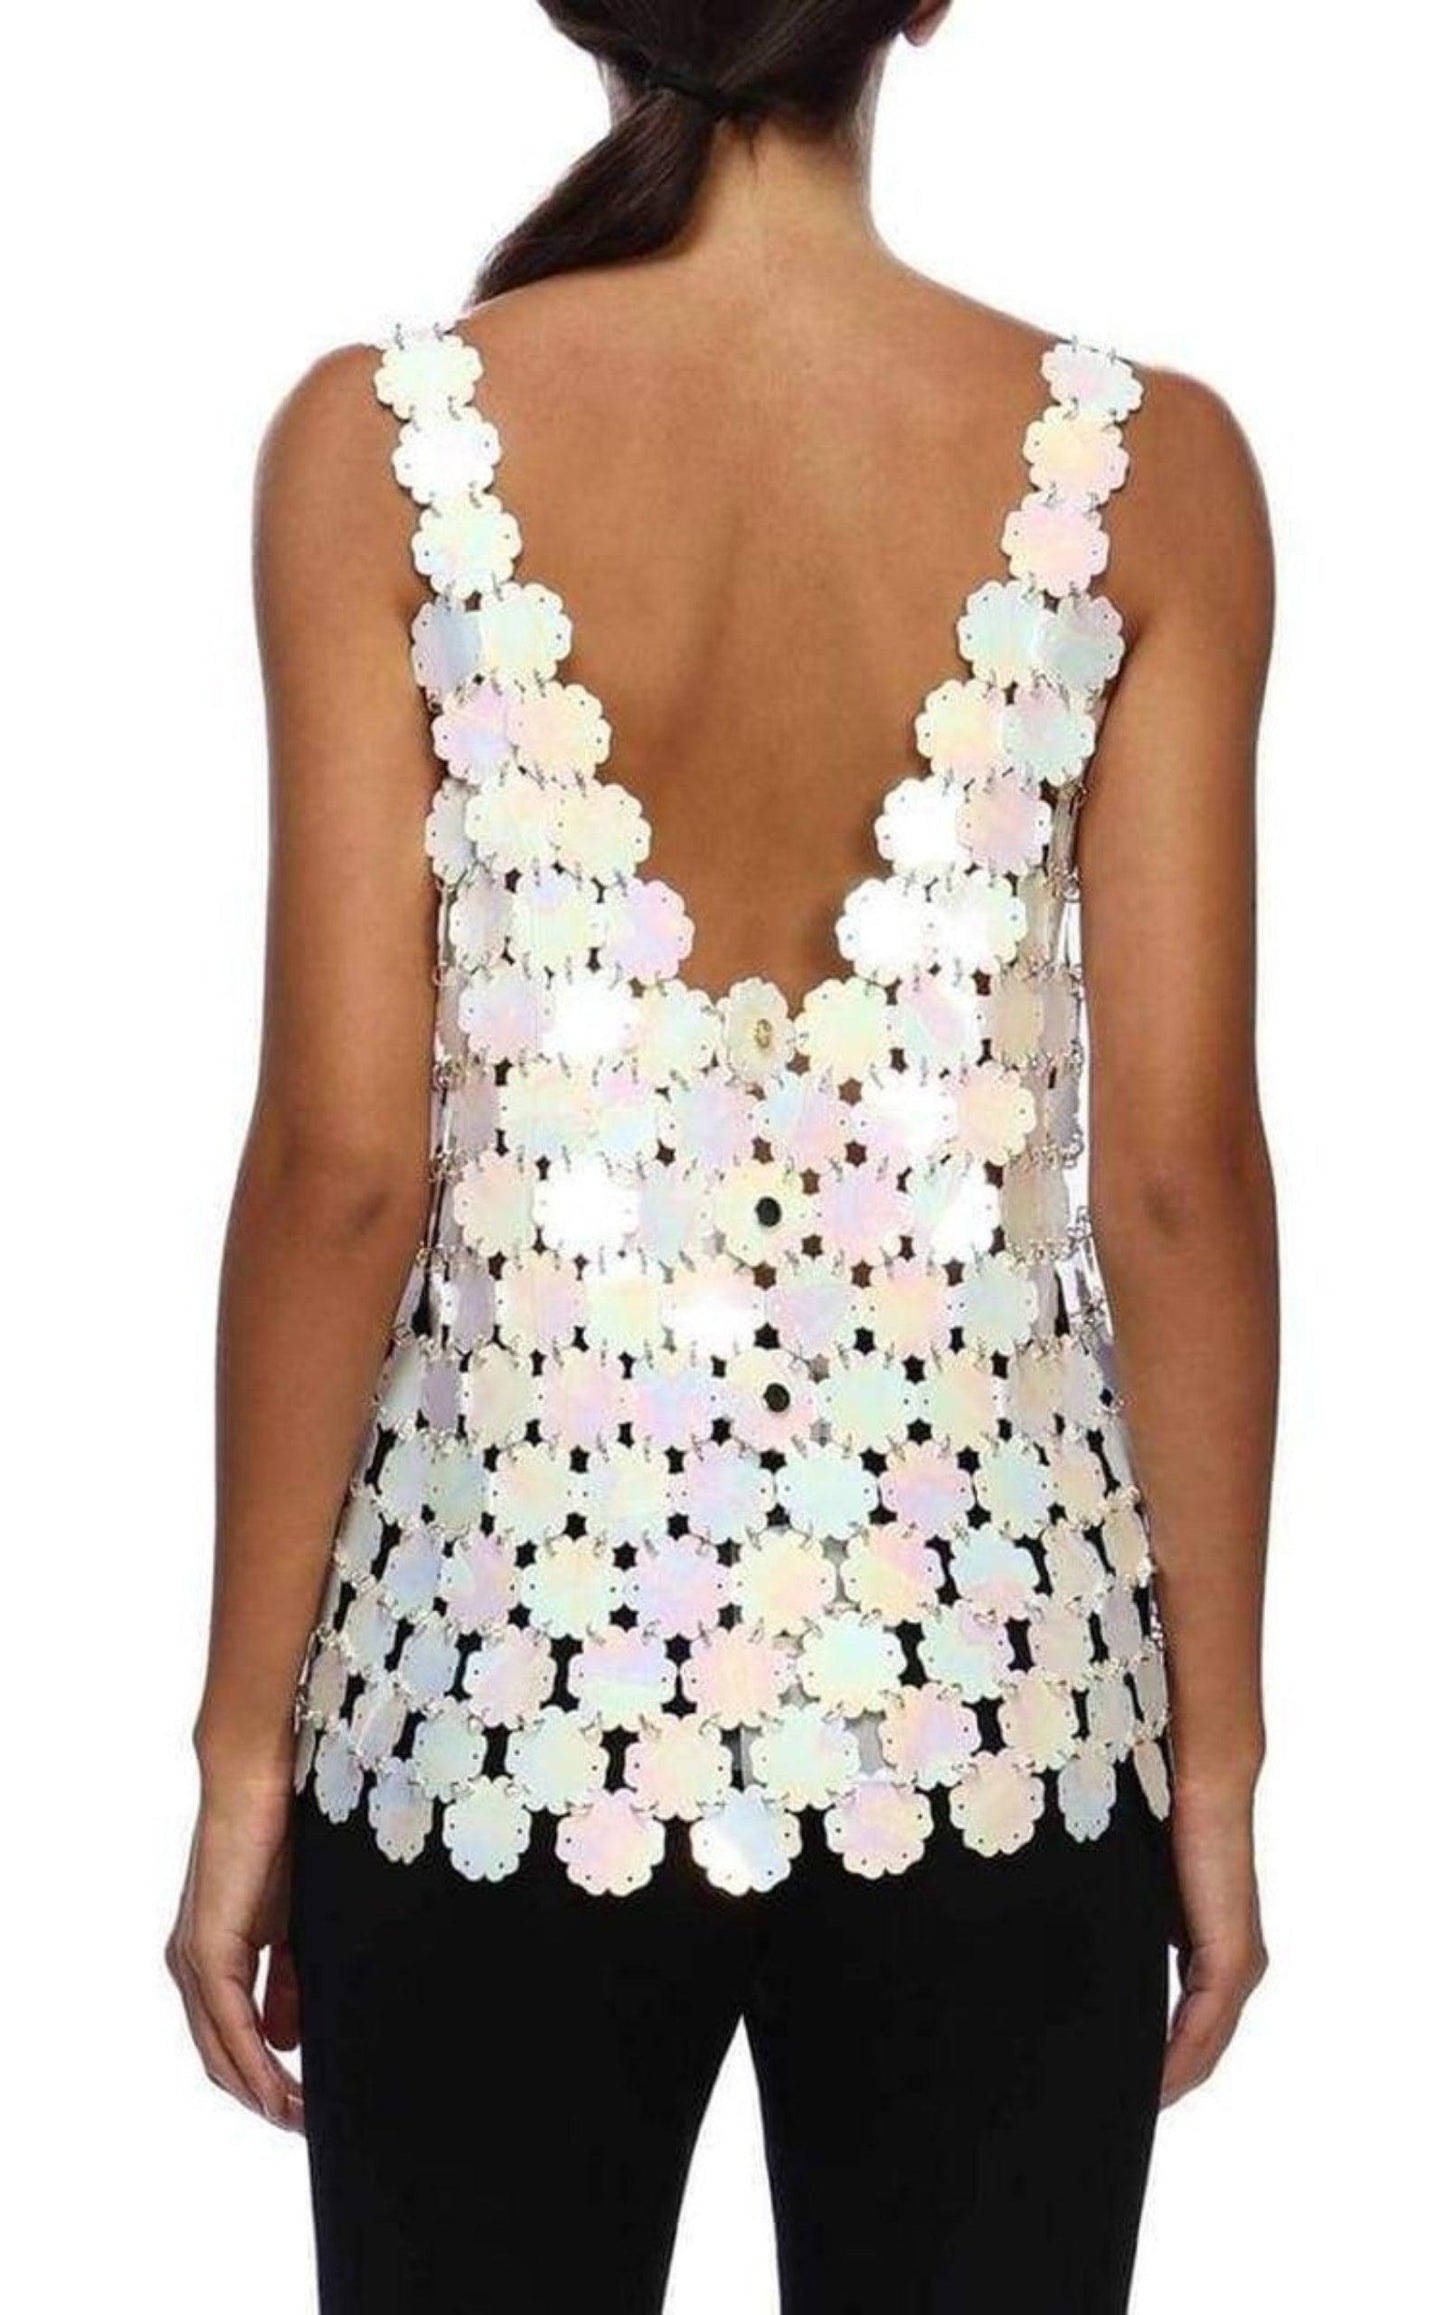  Paco RabannePearl Blossom Element Top - Runway Catalog